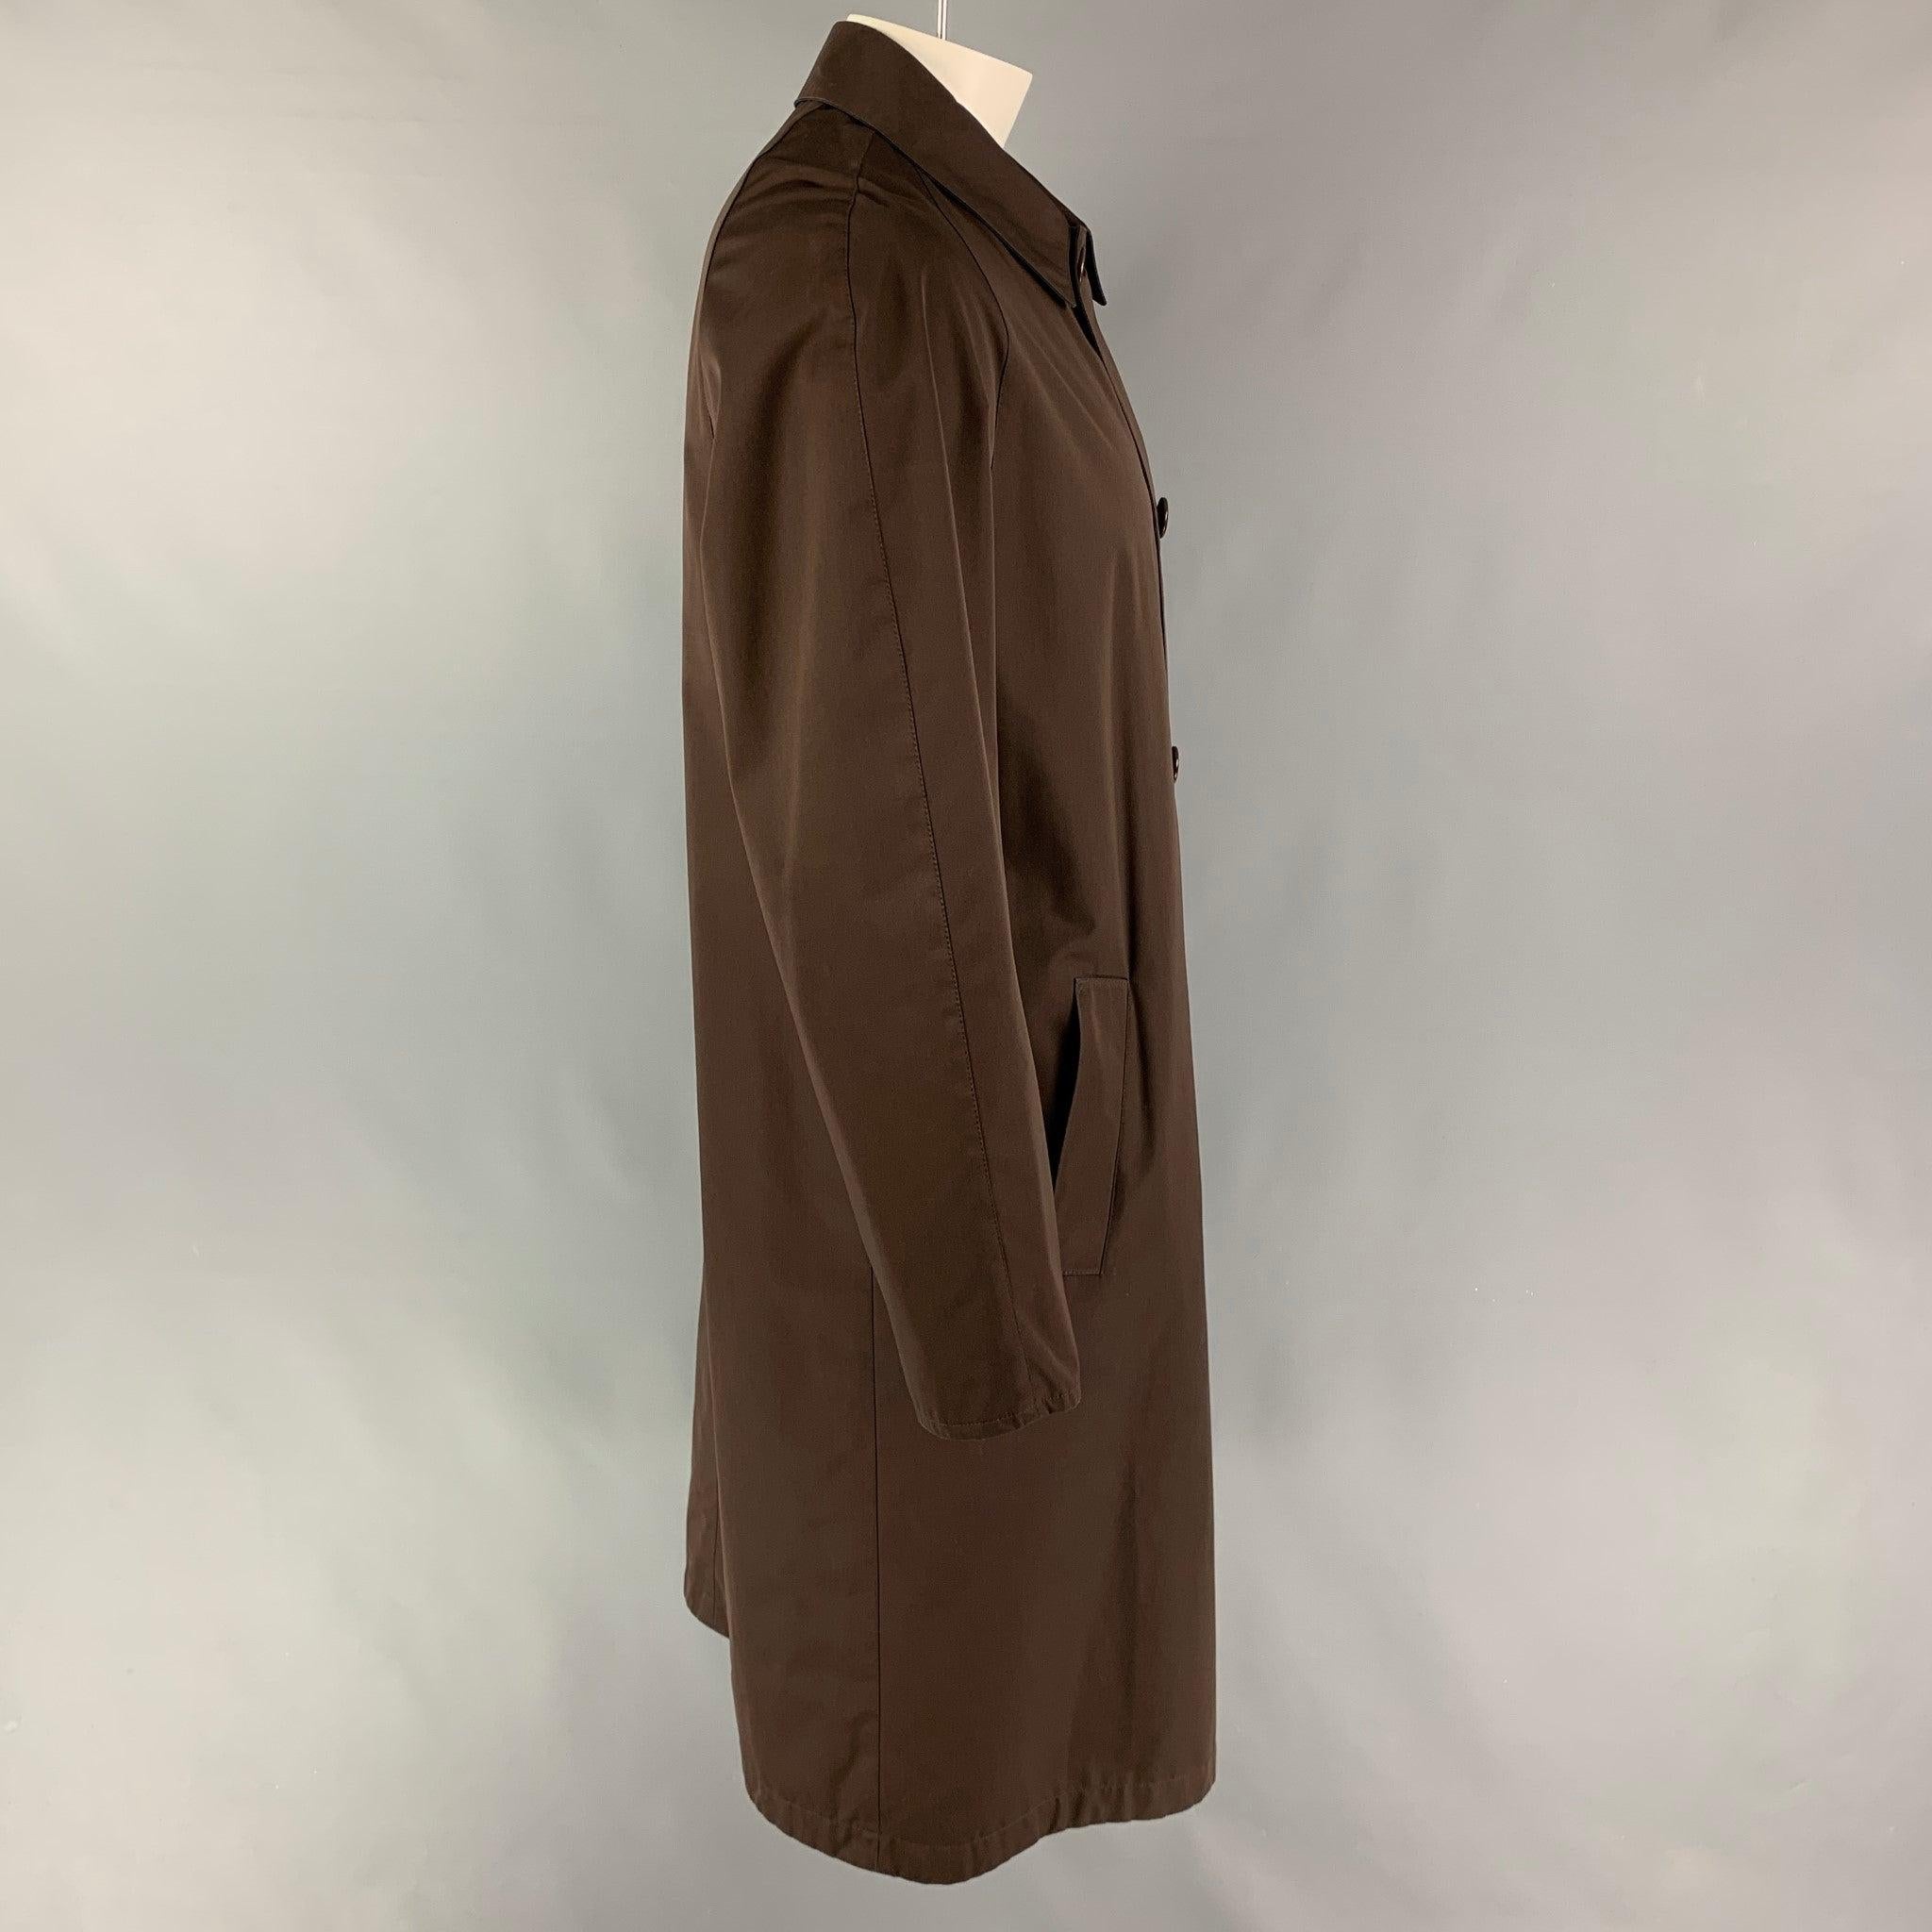 KITON coat comes in a brown & navy cotton blend featuring a reversible style, slit pockets, spread collar, and a hidden placket closure. Made in Italy.
Very Good
Pre-Owned Condition. 

Marked:  52 

Measurements: 
 
Shoulder: 18 inches Chest:
44